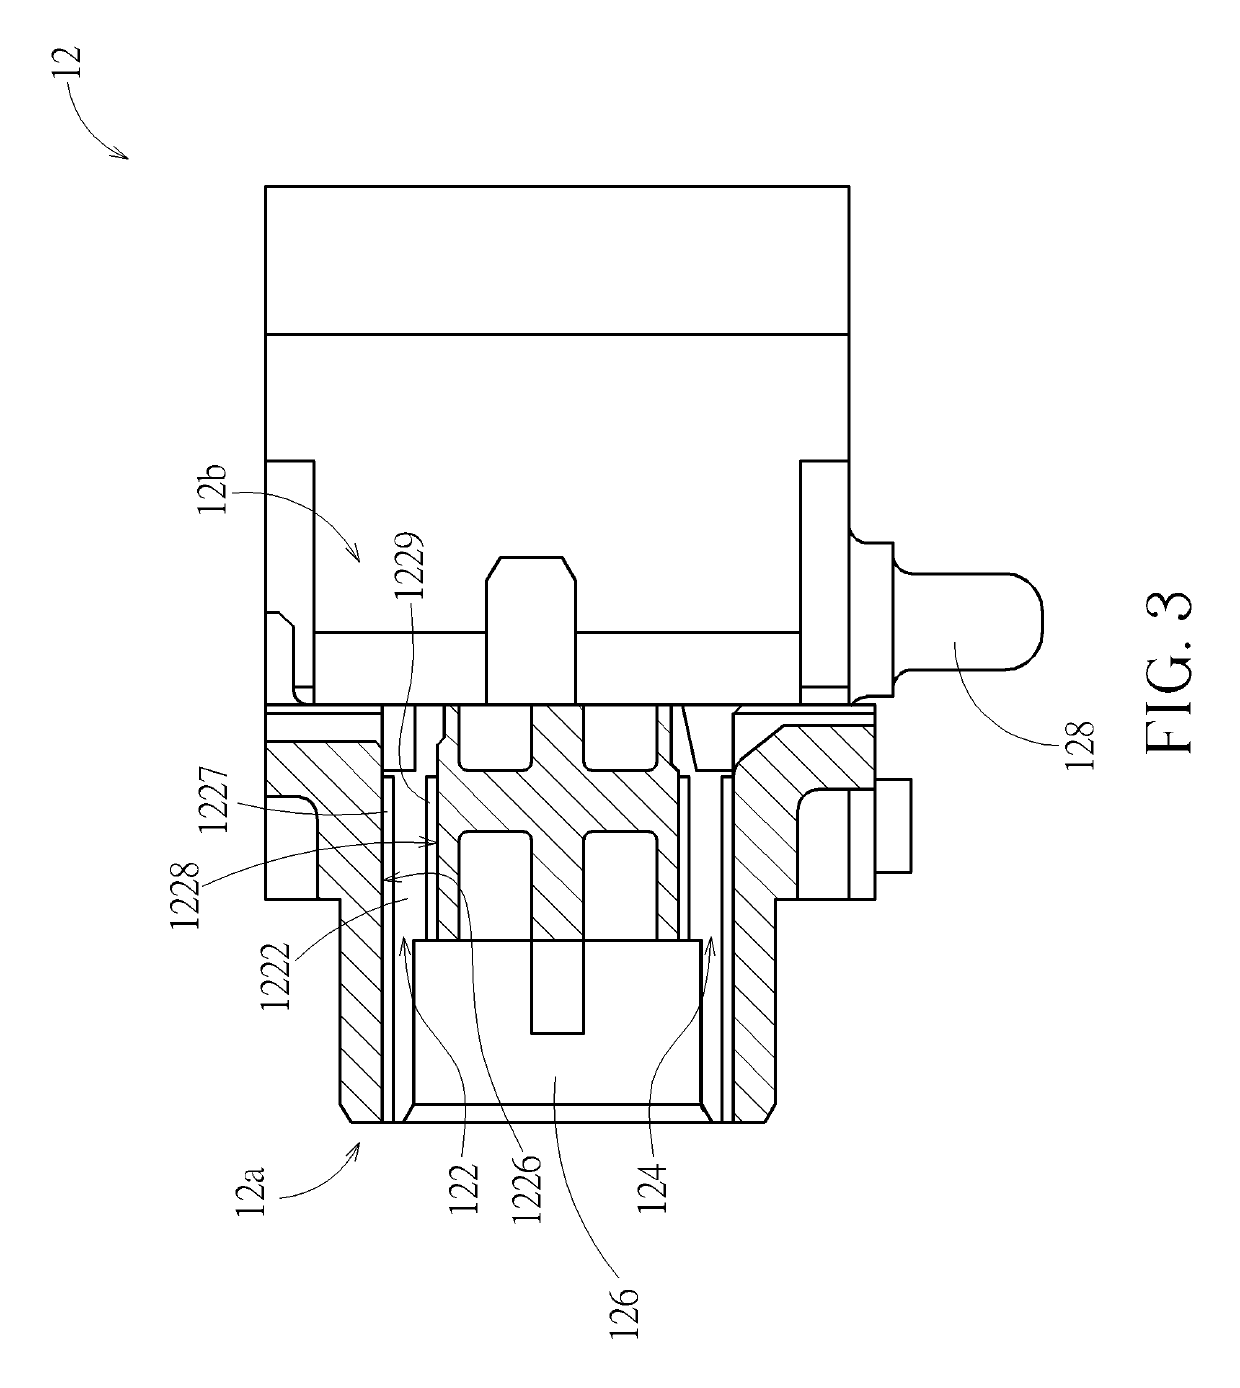 Electrical connector with internal terminals having opposite sides located from connector internal sidewalls